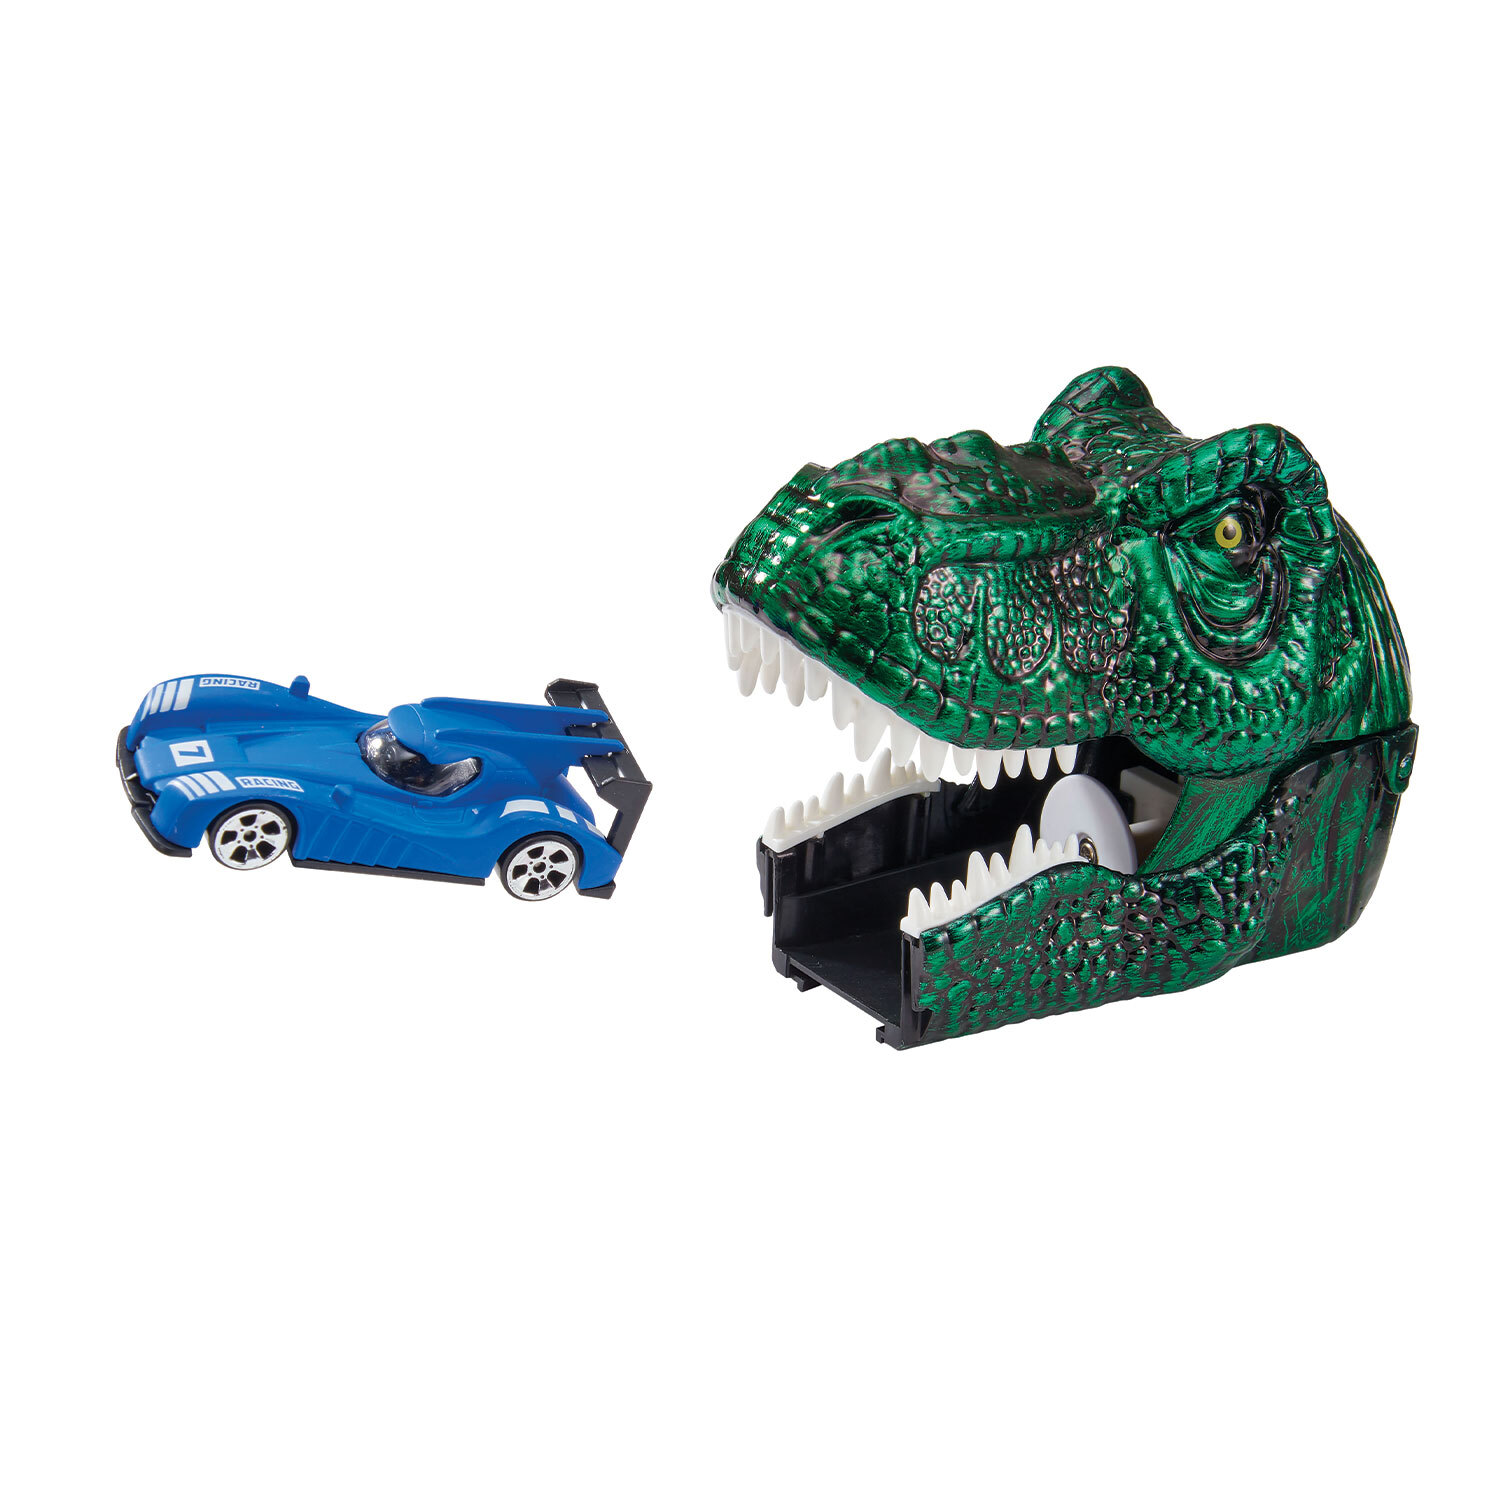 Single Teamsterz Dinosaur Launcher and Car Set in Assorted styles Image 2